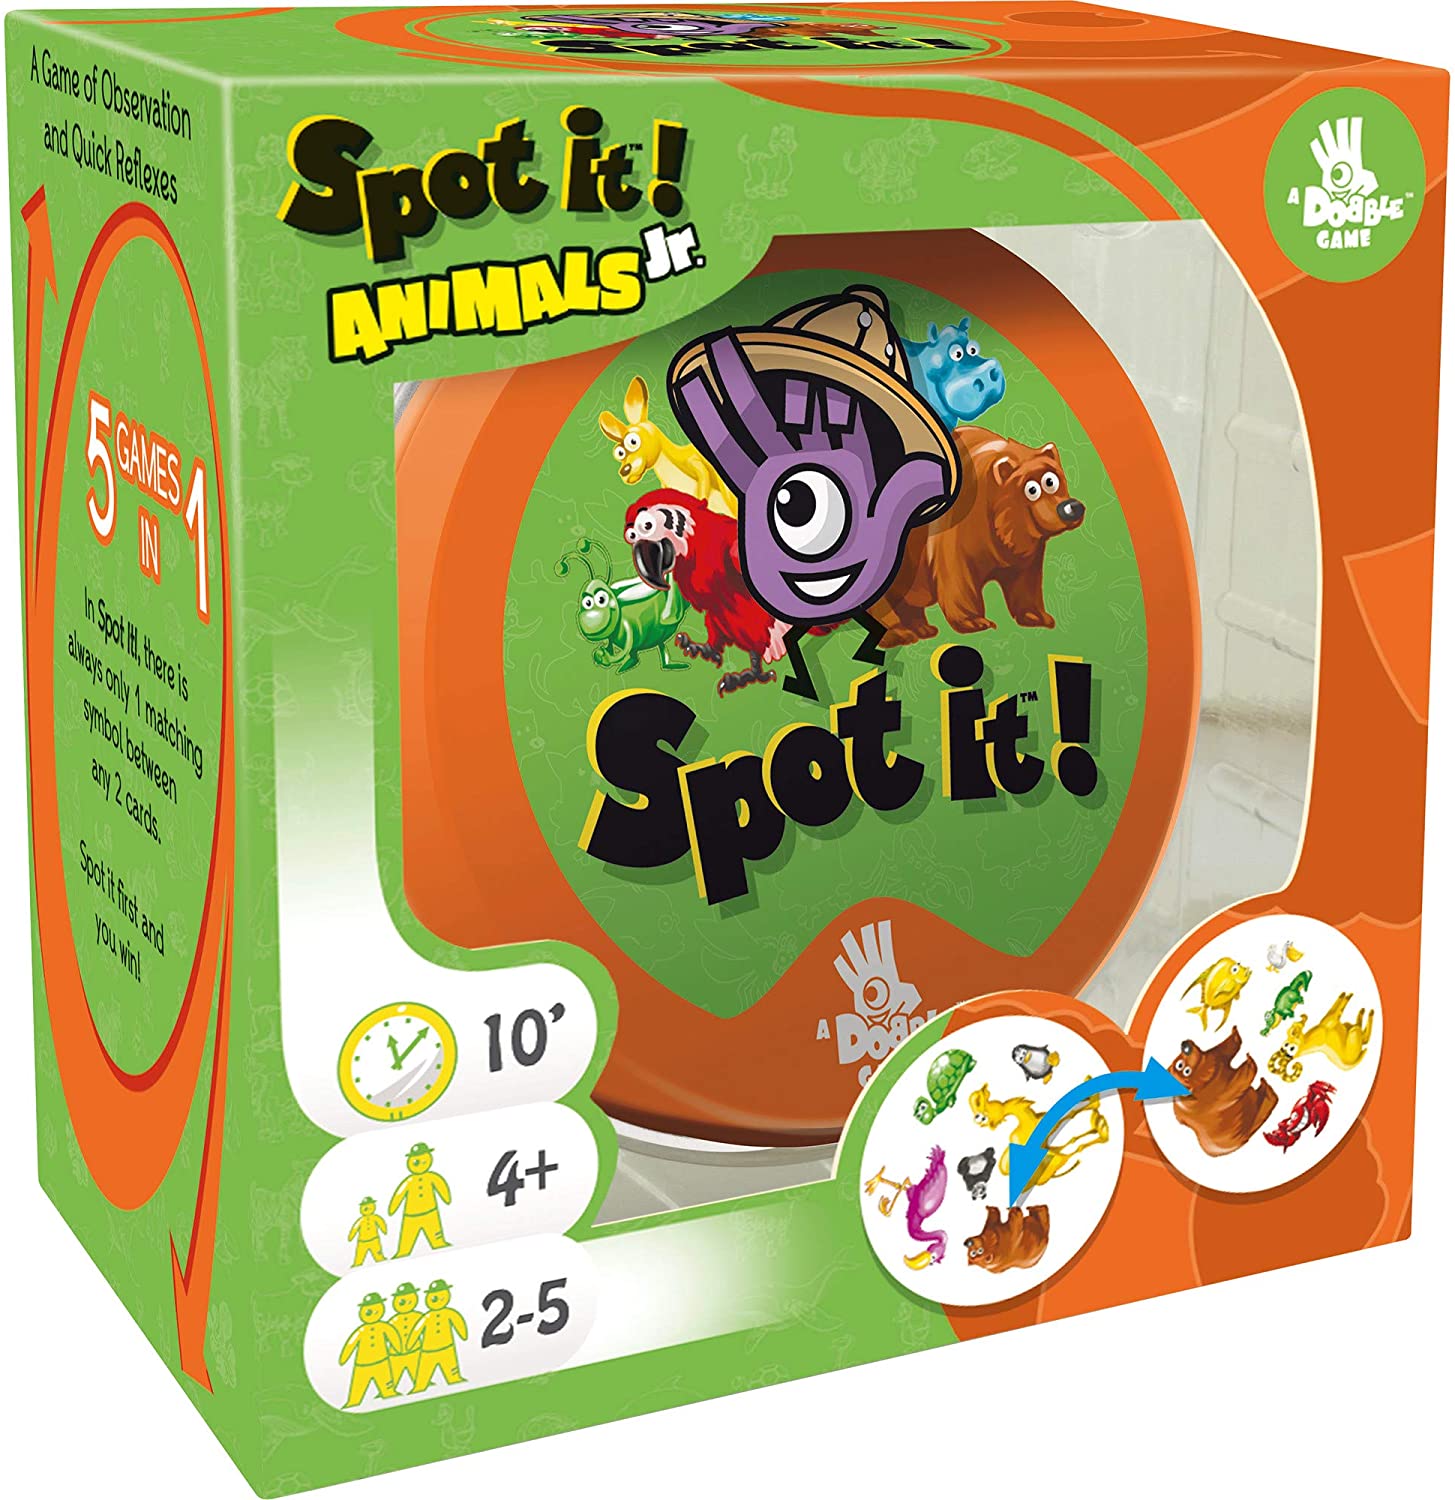 Spot It! Junior Animals Card Game,Game For Kids ,Preschool Age 4+ , 2 to 5 Players